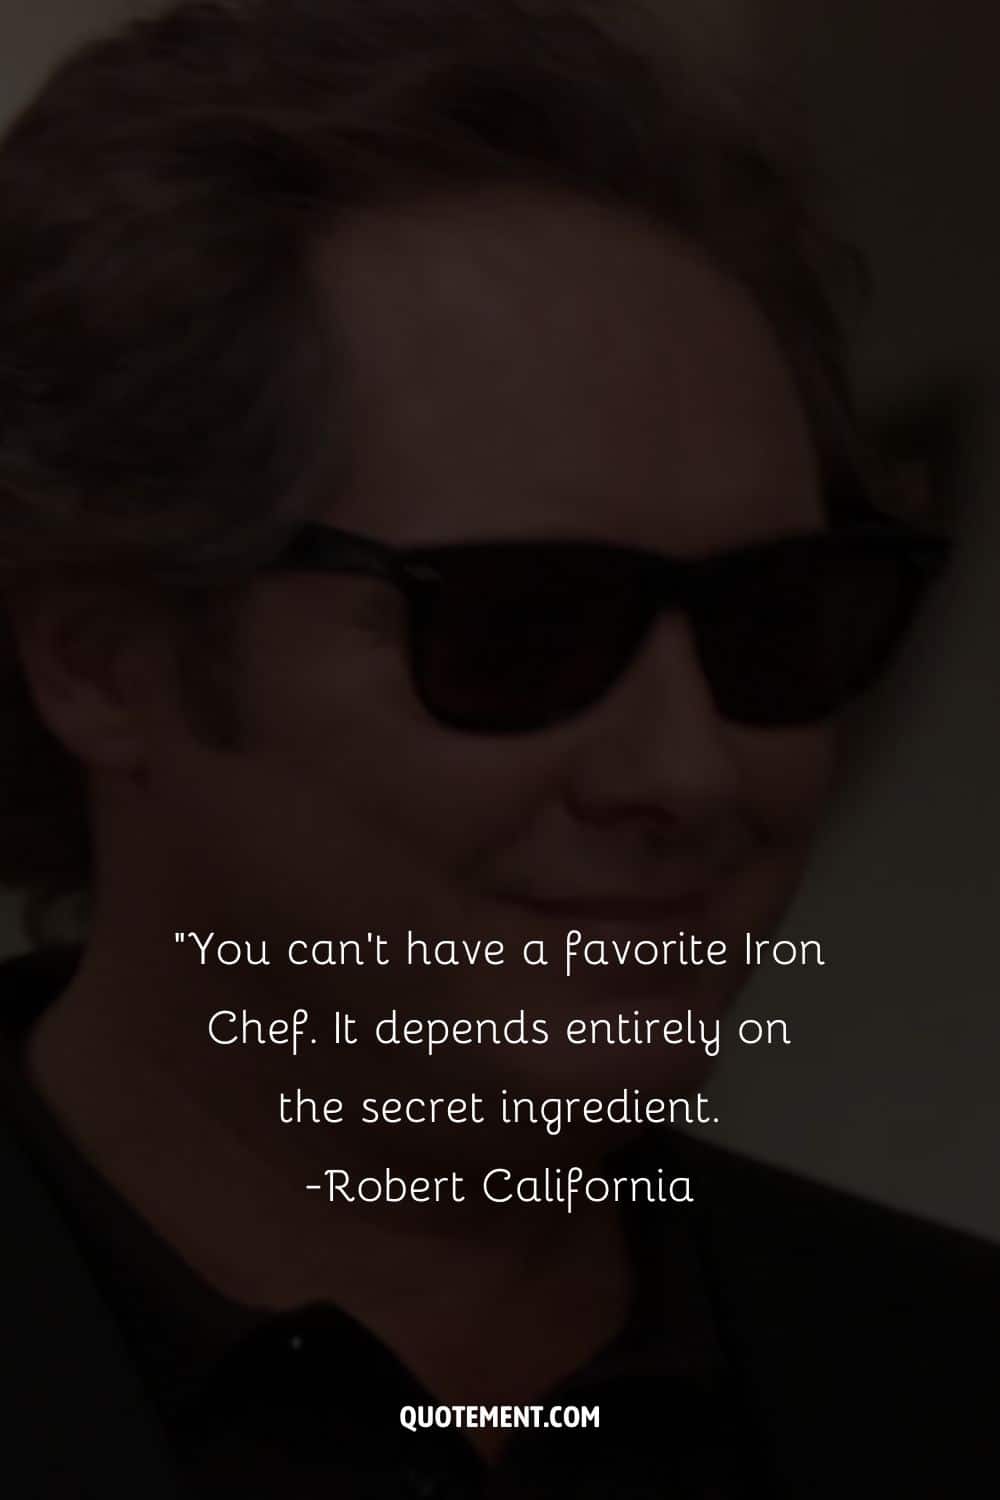 You can't have a favorite Iron Chef.